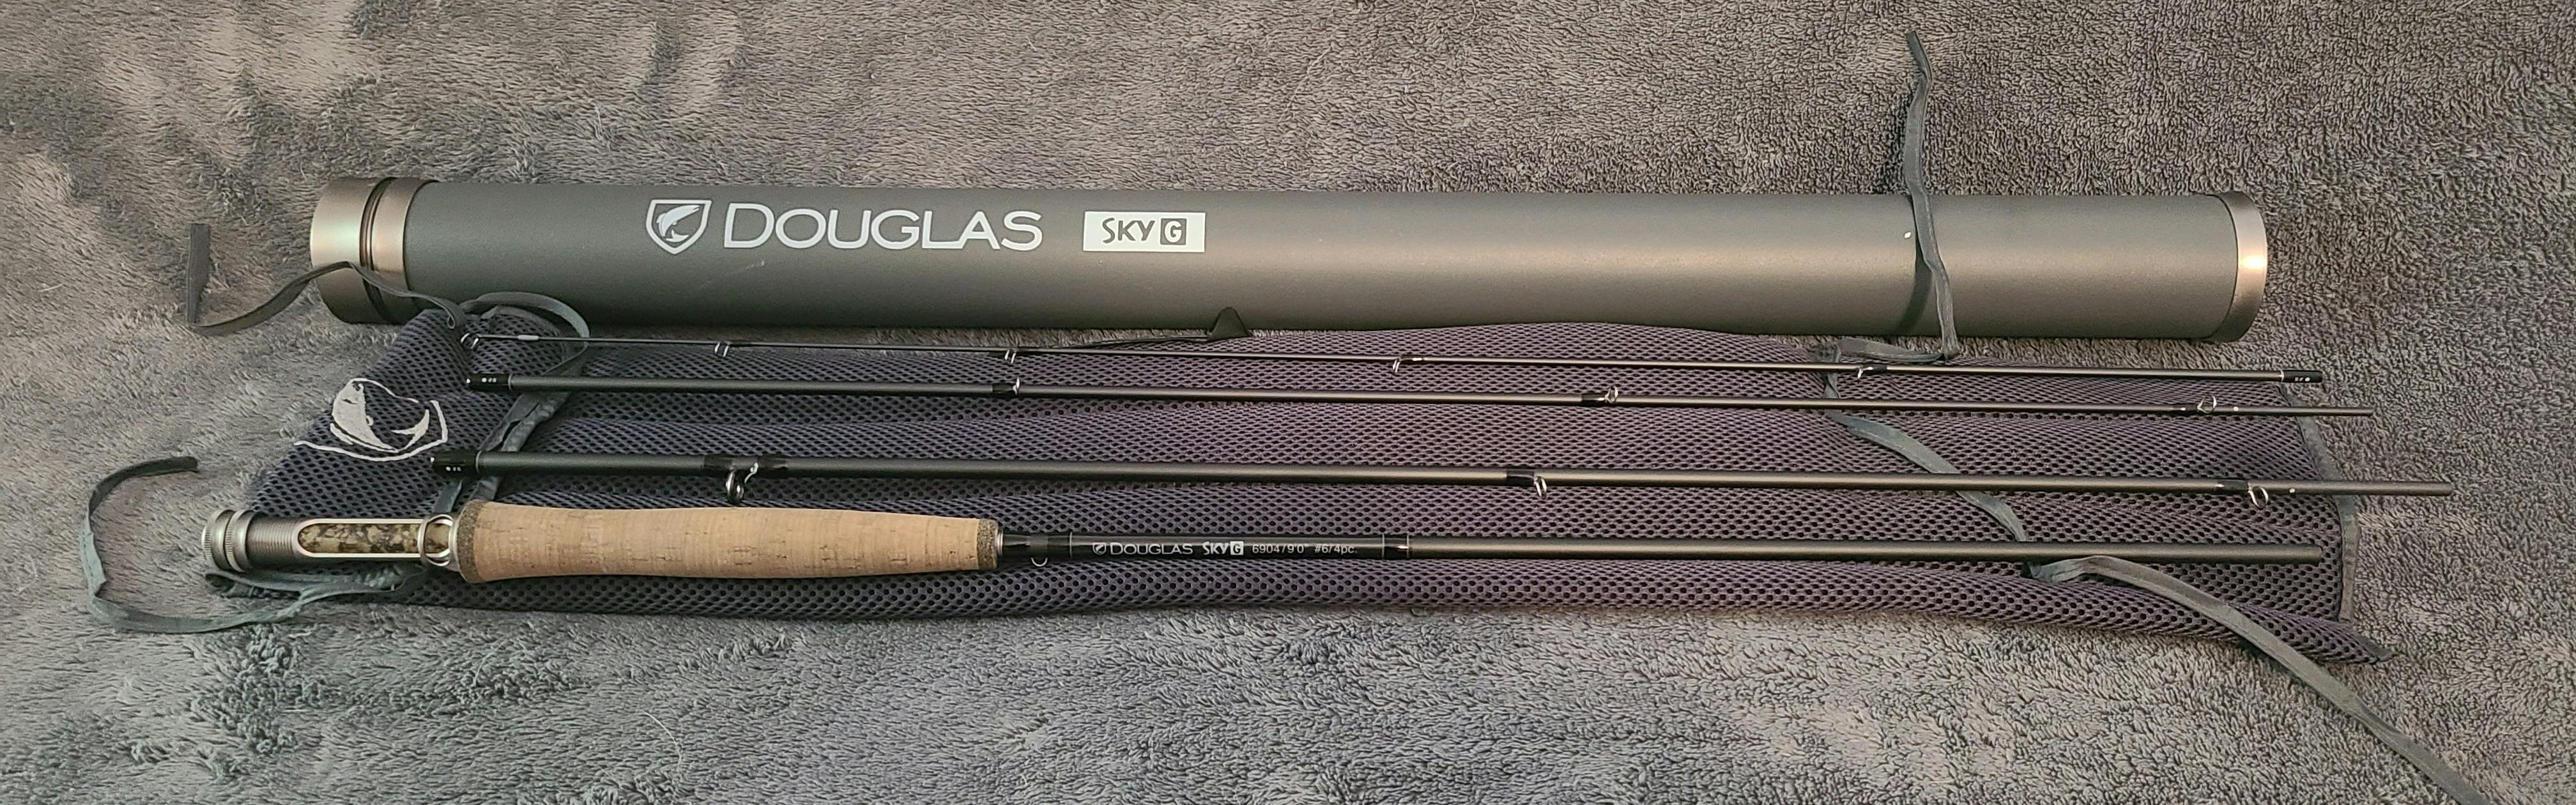 Expert Review: Temple Fork Outfitters Blue Ribbon Fly Rod